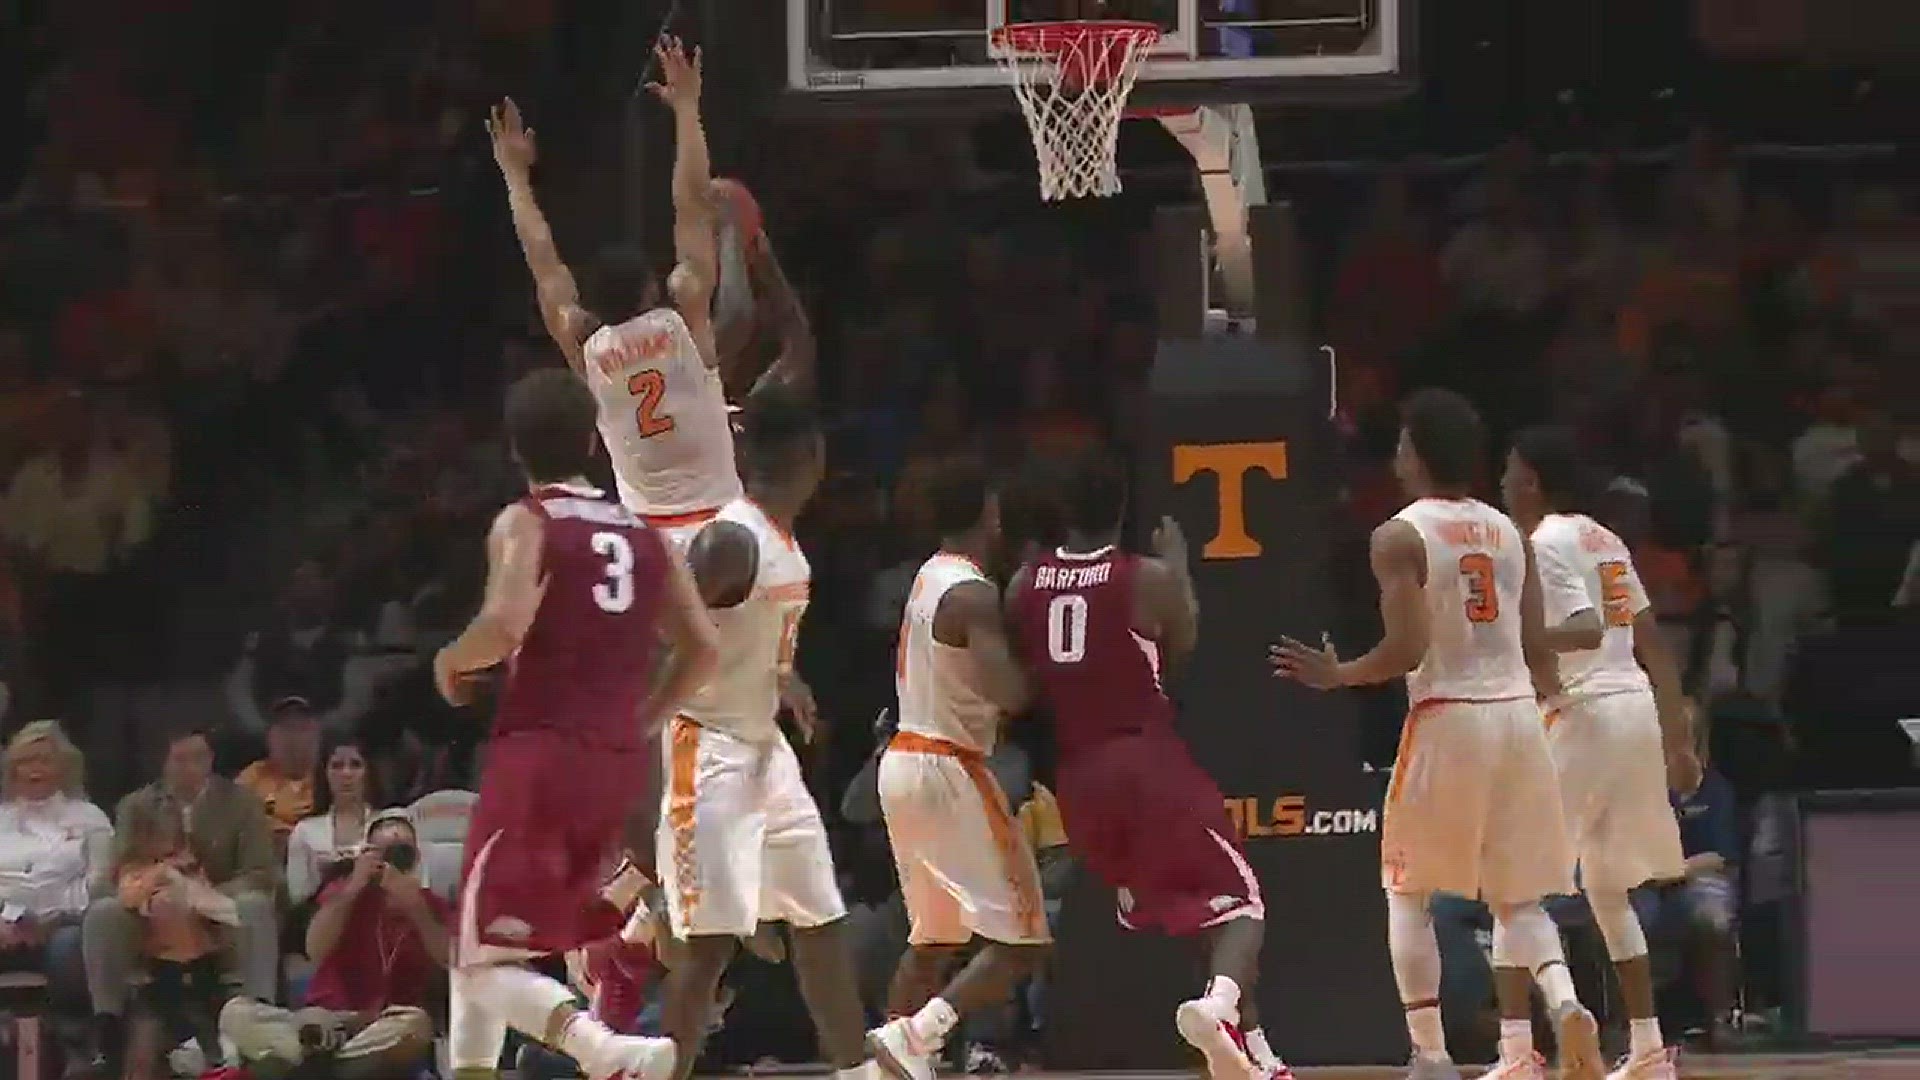 Tennessee's Grant Williams rejected a Moses Kingsley shot attempt and started a fast break that lead to a Robert Hubbs III dunk to cut Arkansas' lead to one late in the second half of the Hogs' 82-78 win.